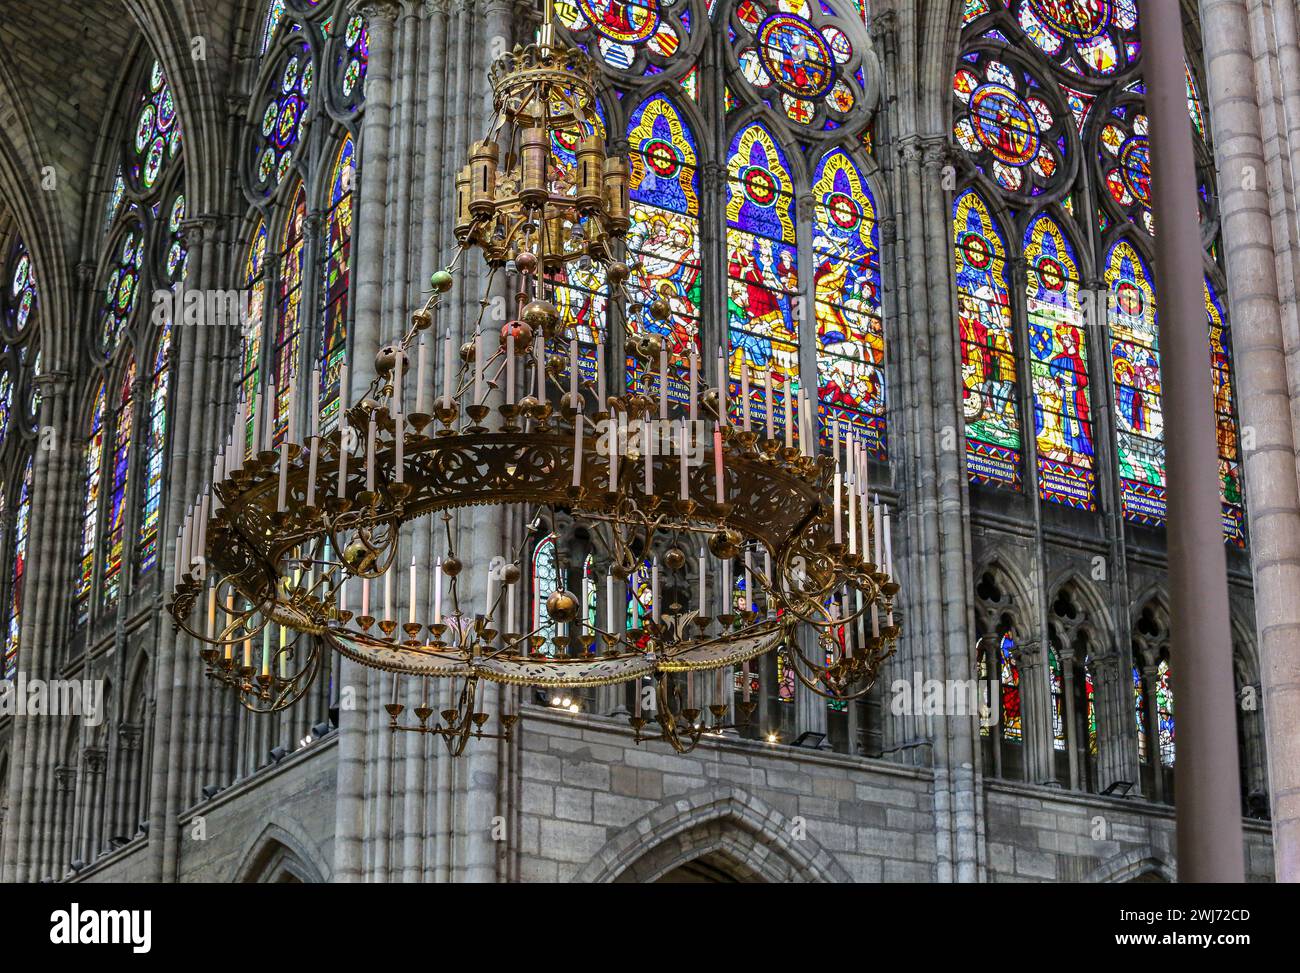 Saint-Denis, France. Feb 13, 2024: Today, the new spire of Notre-Dame de Paris is visible in the French capital's sky and will be fully unveiled in time for the Olympic Games where 15.3 million visitors are expected but the cathedral will not reopen until Dec 8, 2024. Tourists interested in religious art will discover that the Basilica Cathedral of Saint-Denis, also a masterpiece of Gothic architecture, has nothing to envy of its cousin N-D. This royal necropolis contains 32 queens, 60 princes/princesses and 43 kings of France sumptuous recumbents and tombs.Credit: Kevin Izorce/Alamy Live News Stock Photo